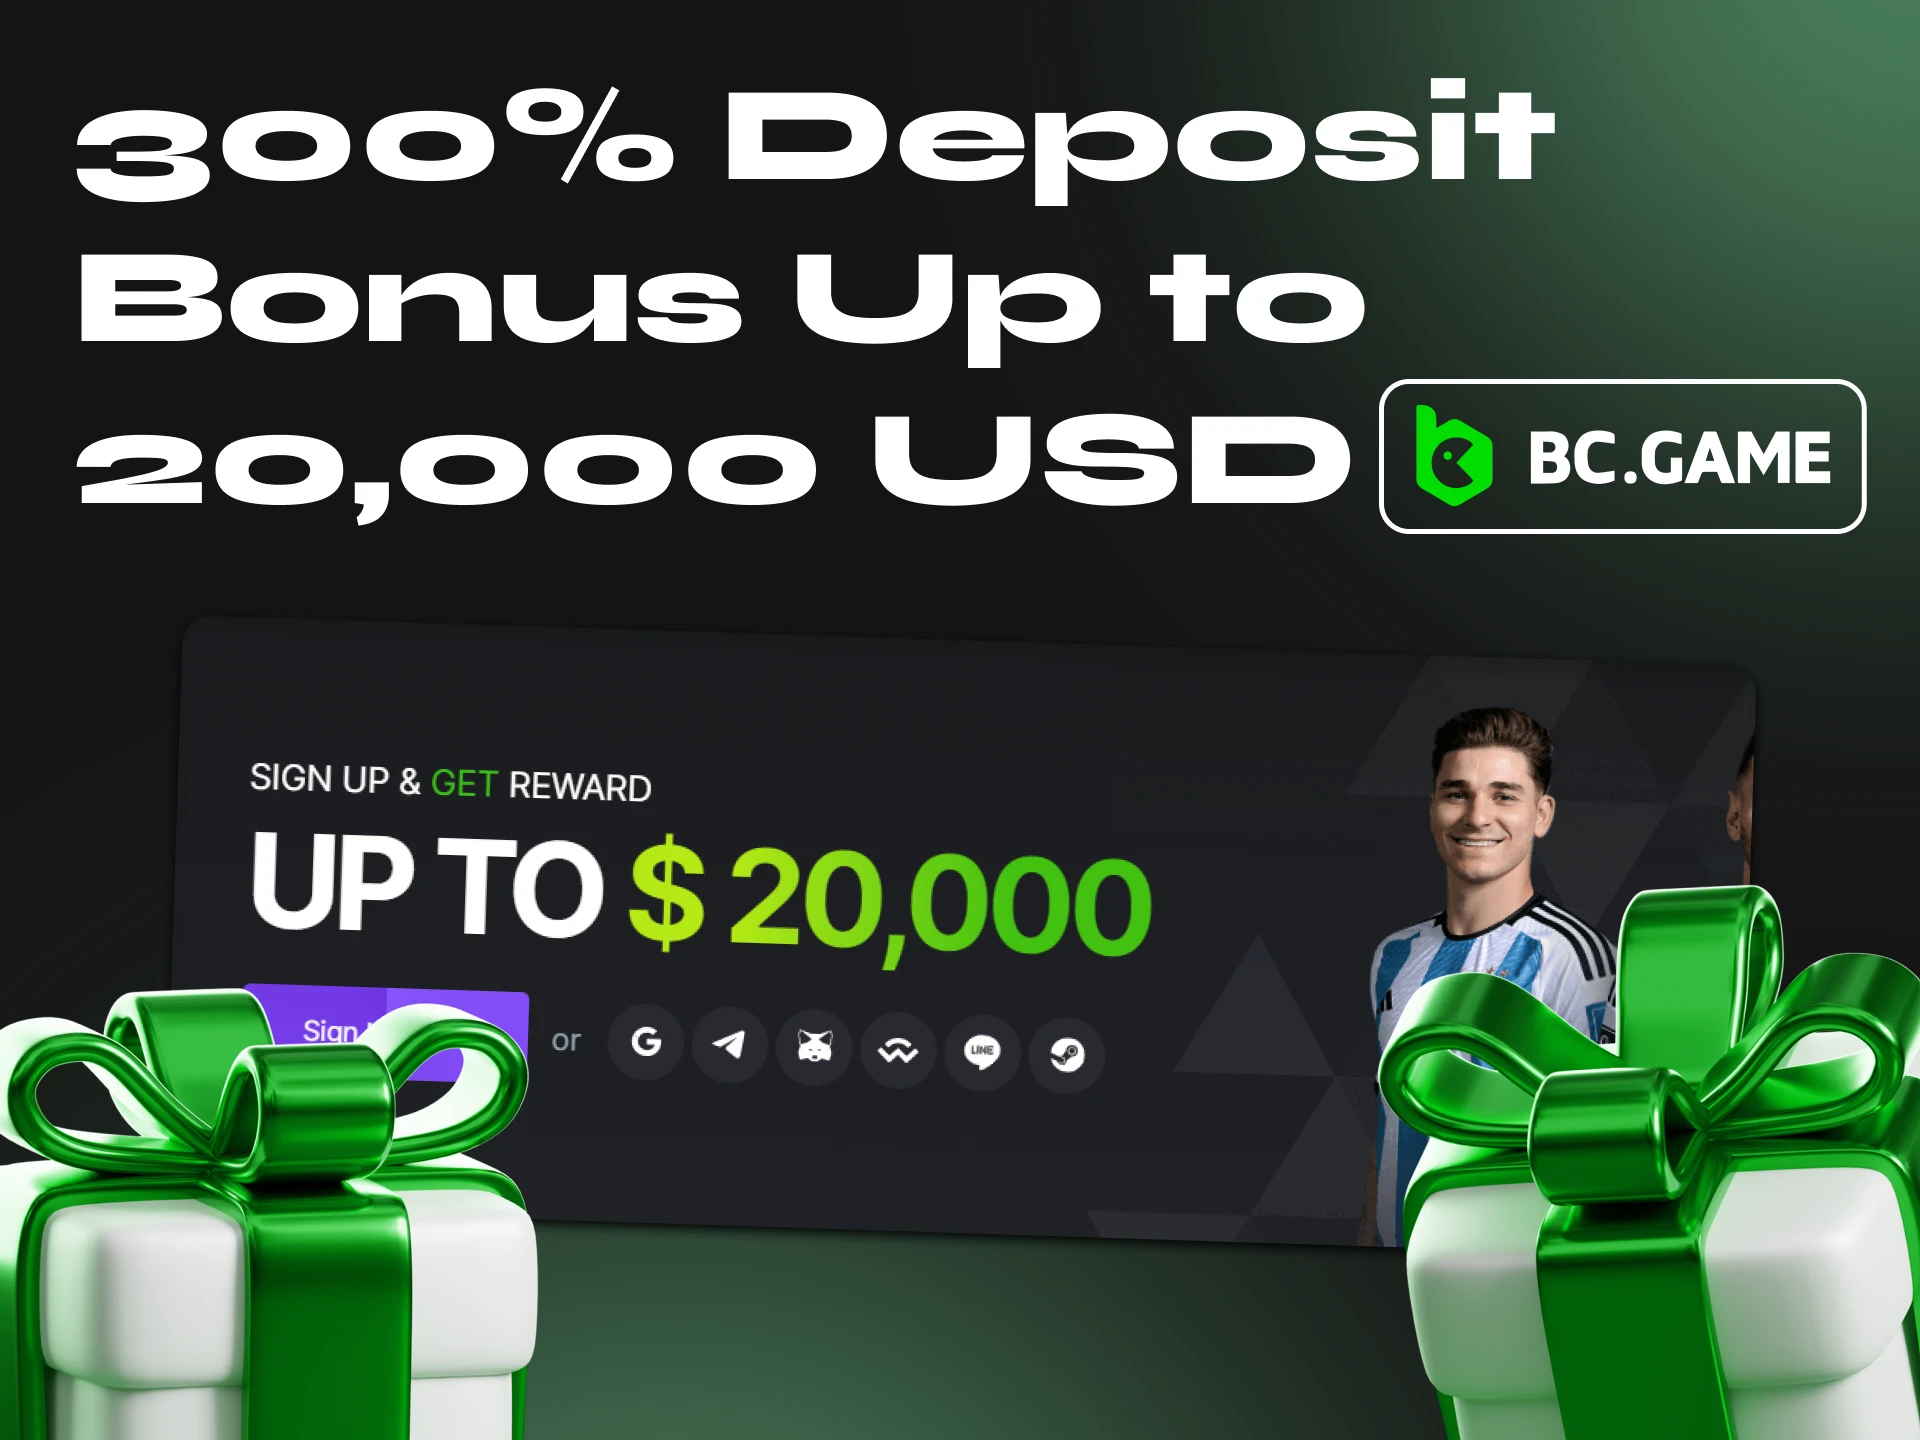 BC Game Casino offers a lucrative welcome bonus that you can use to play poker.